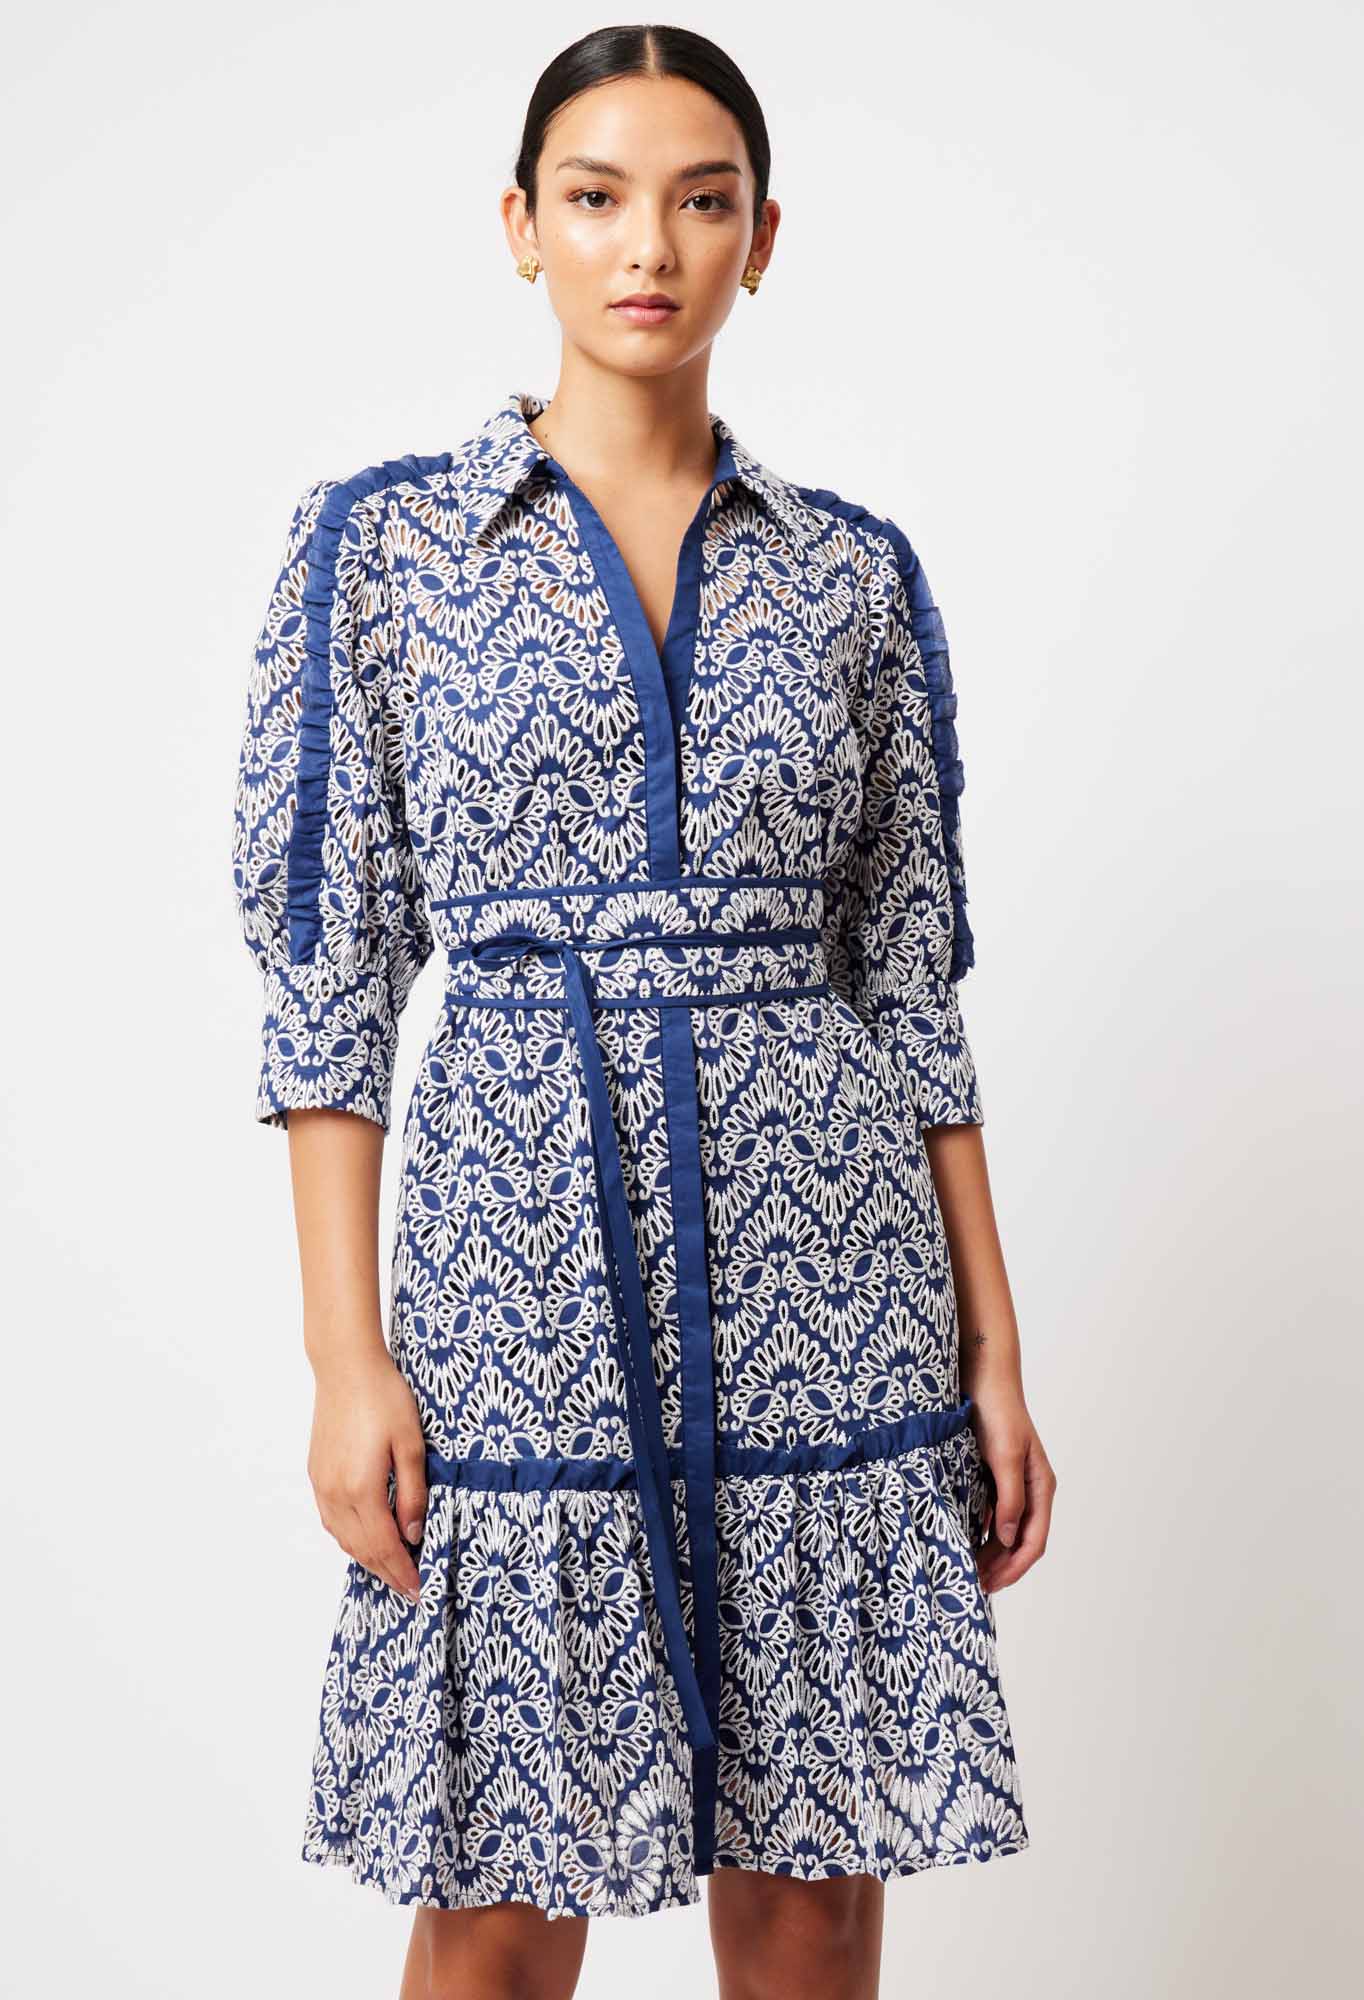 OnceWas Adeline Embroidered Cotton Dress in Navy/White Embroidery